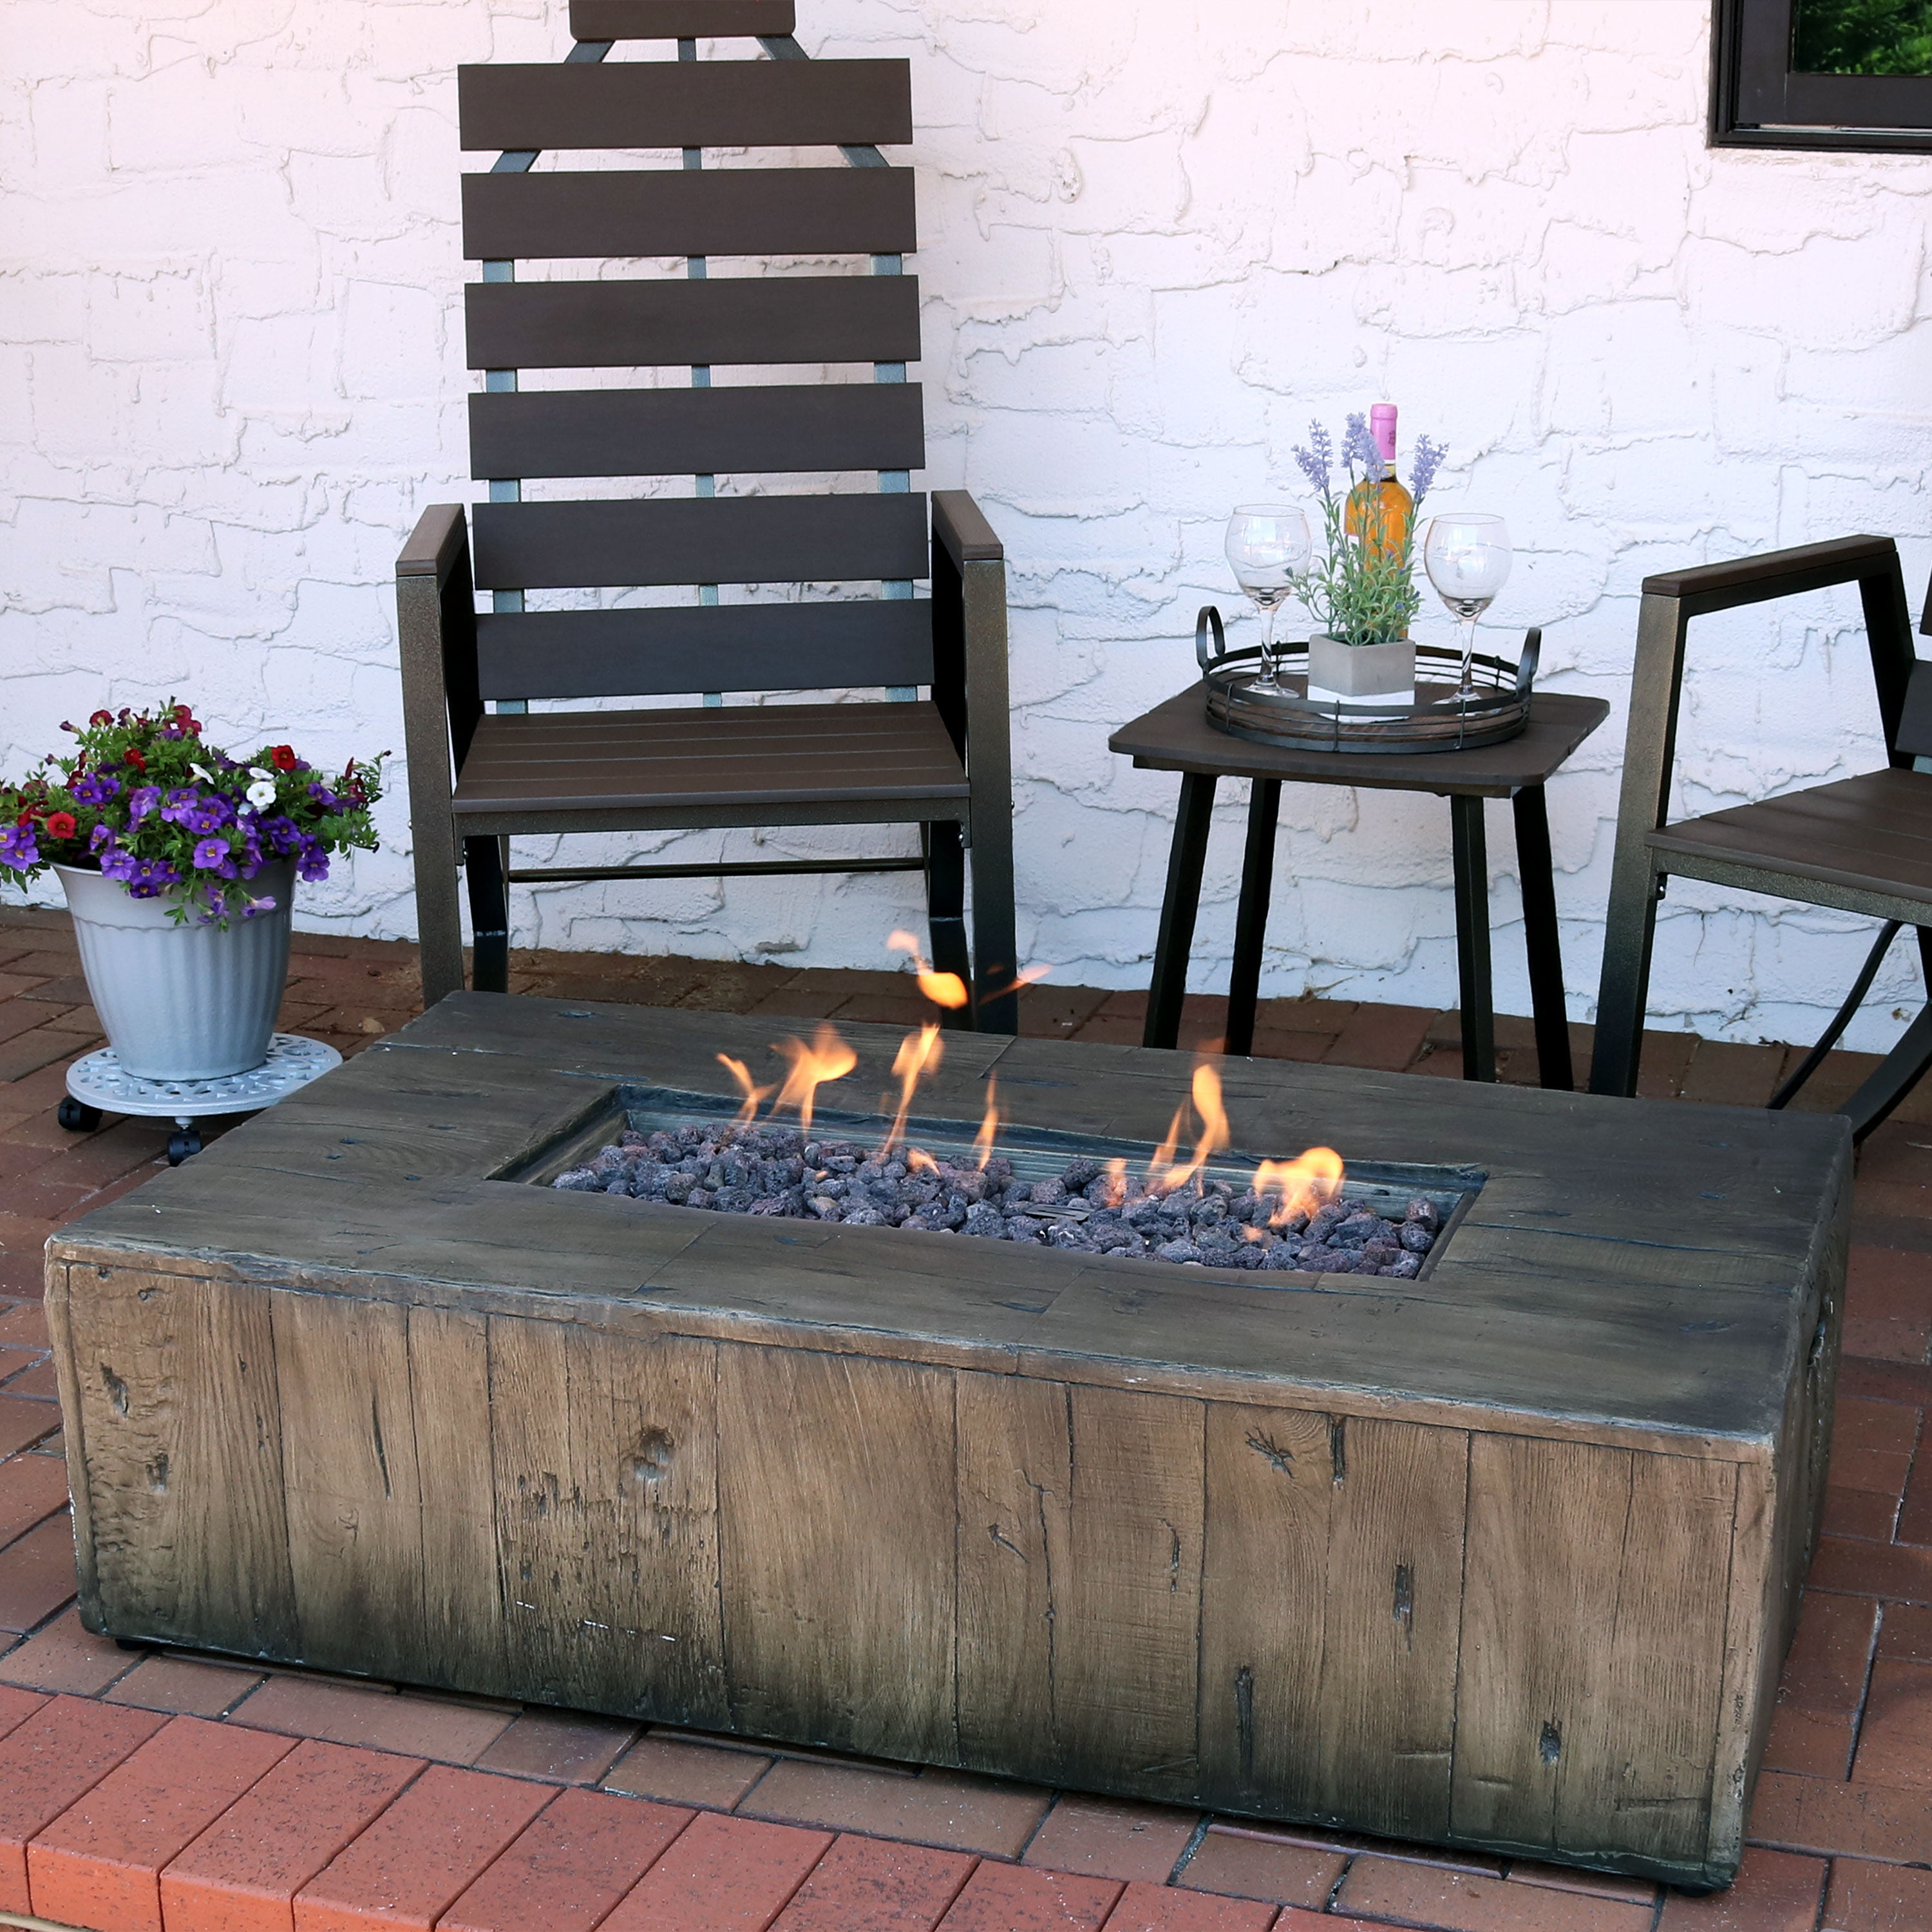 Sunnydaze Rustic Propane Gas Fire Pit, Round Propane Fire Pit Table And Chairs